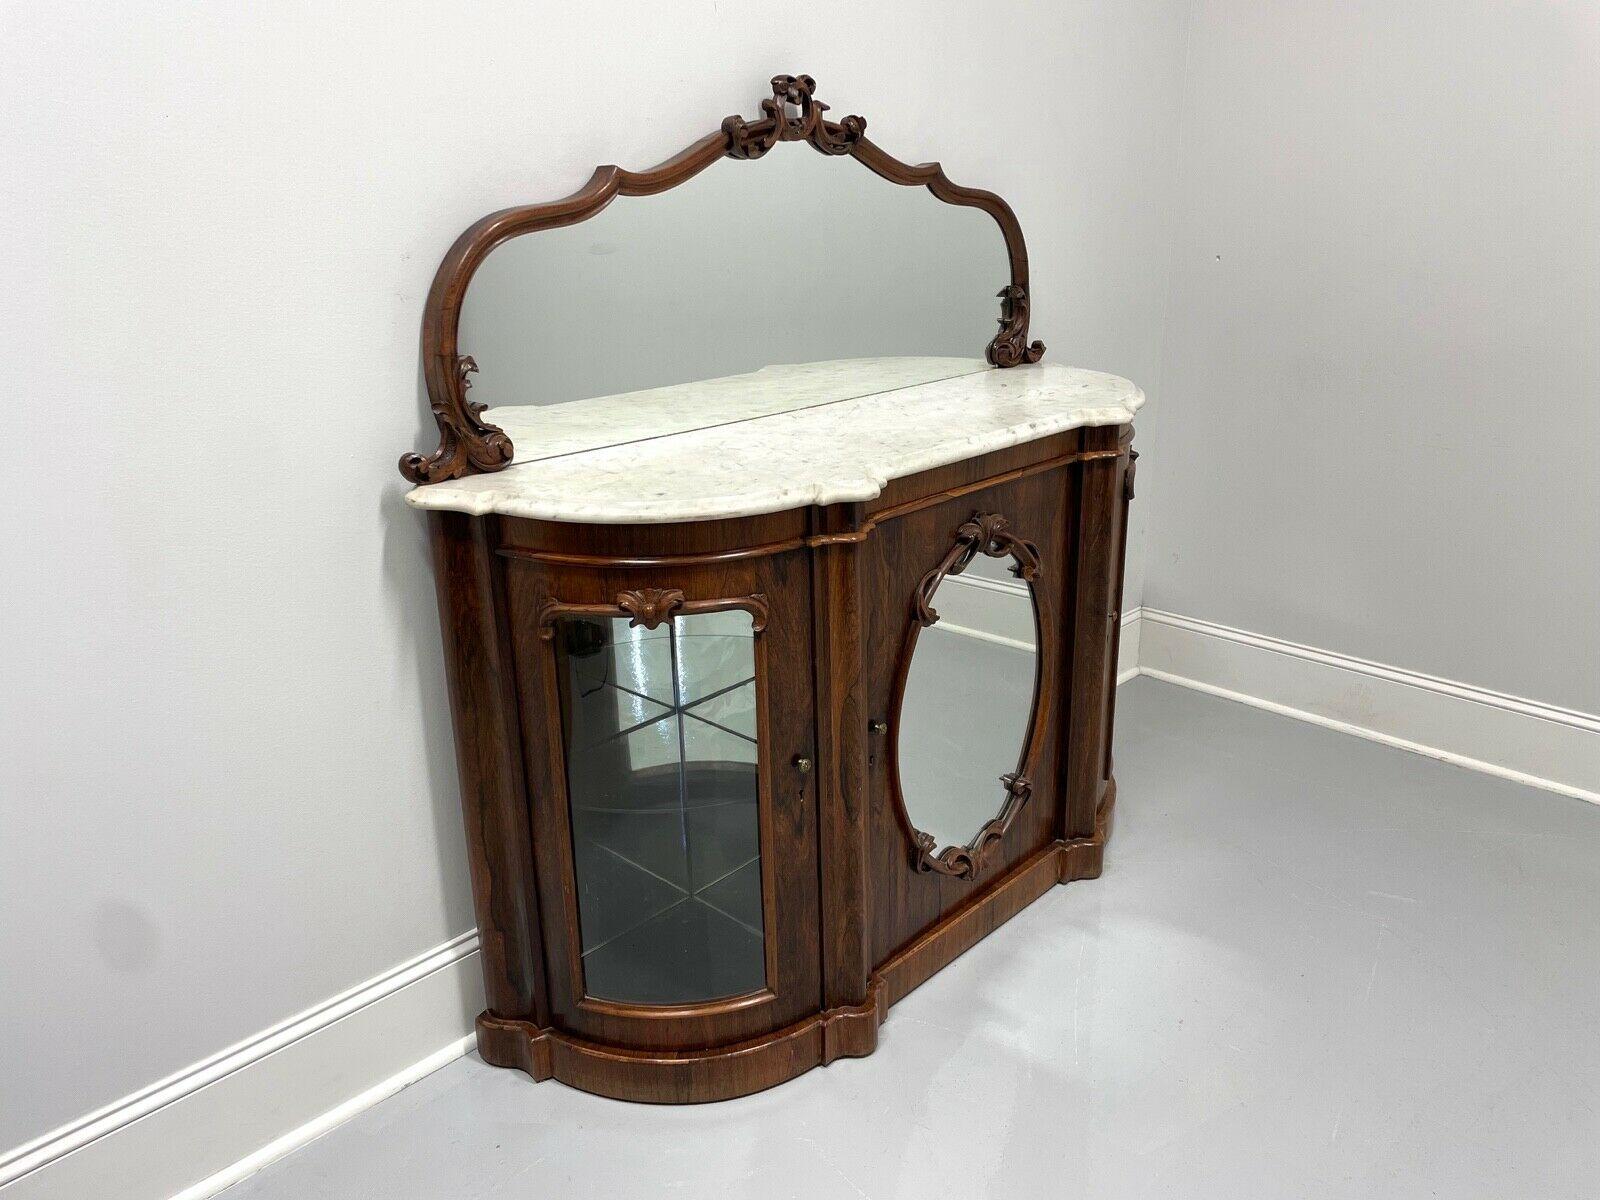 An antique mid-19th century credenza in the Victorian Rococo Revival style, unbranded. Rosewood & rosewood veneers with decoratively carved mirror backsplash, original serpentine shaped white marble top, decorative carvings to center door panel